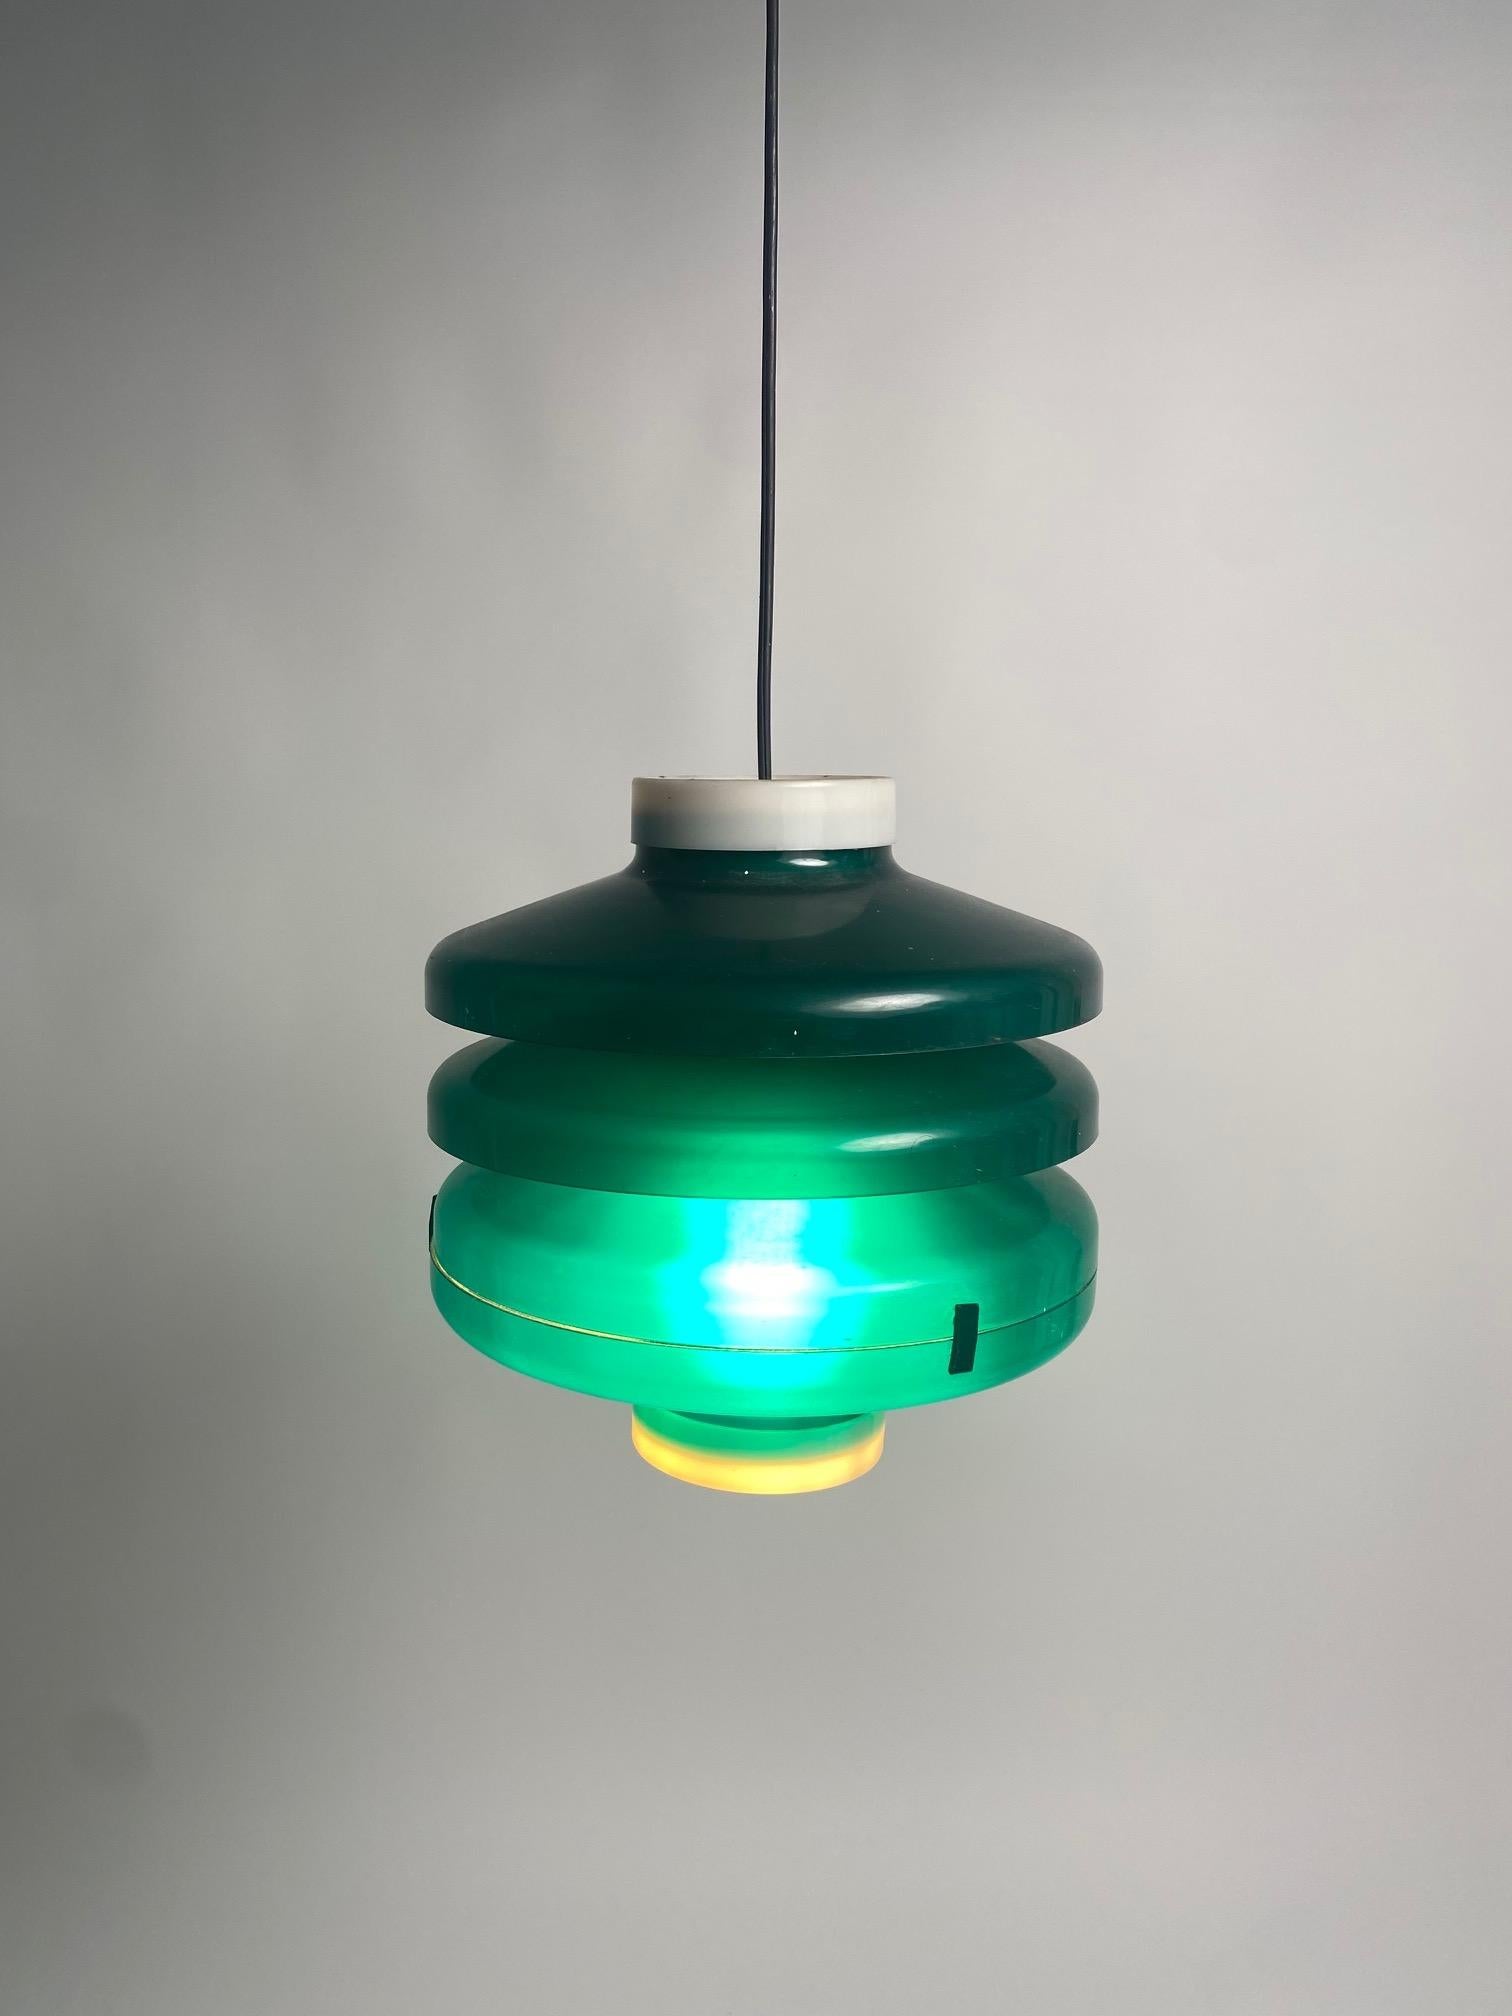 Italian Mid-Century Suspension, in the style of Stilnovo.

The lamp, in green and white Plexi, will give a soft and colorful light to your room

Overall height: 90 cm
Lamp height: 27 cm
Diameter: 27cm